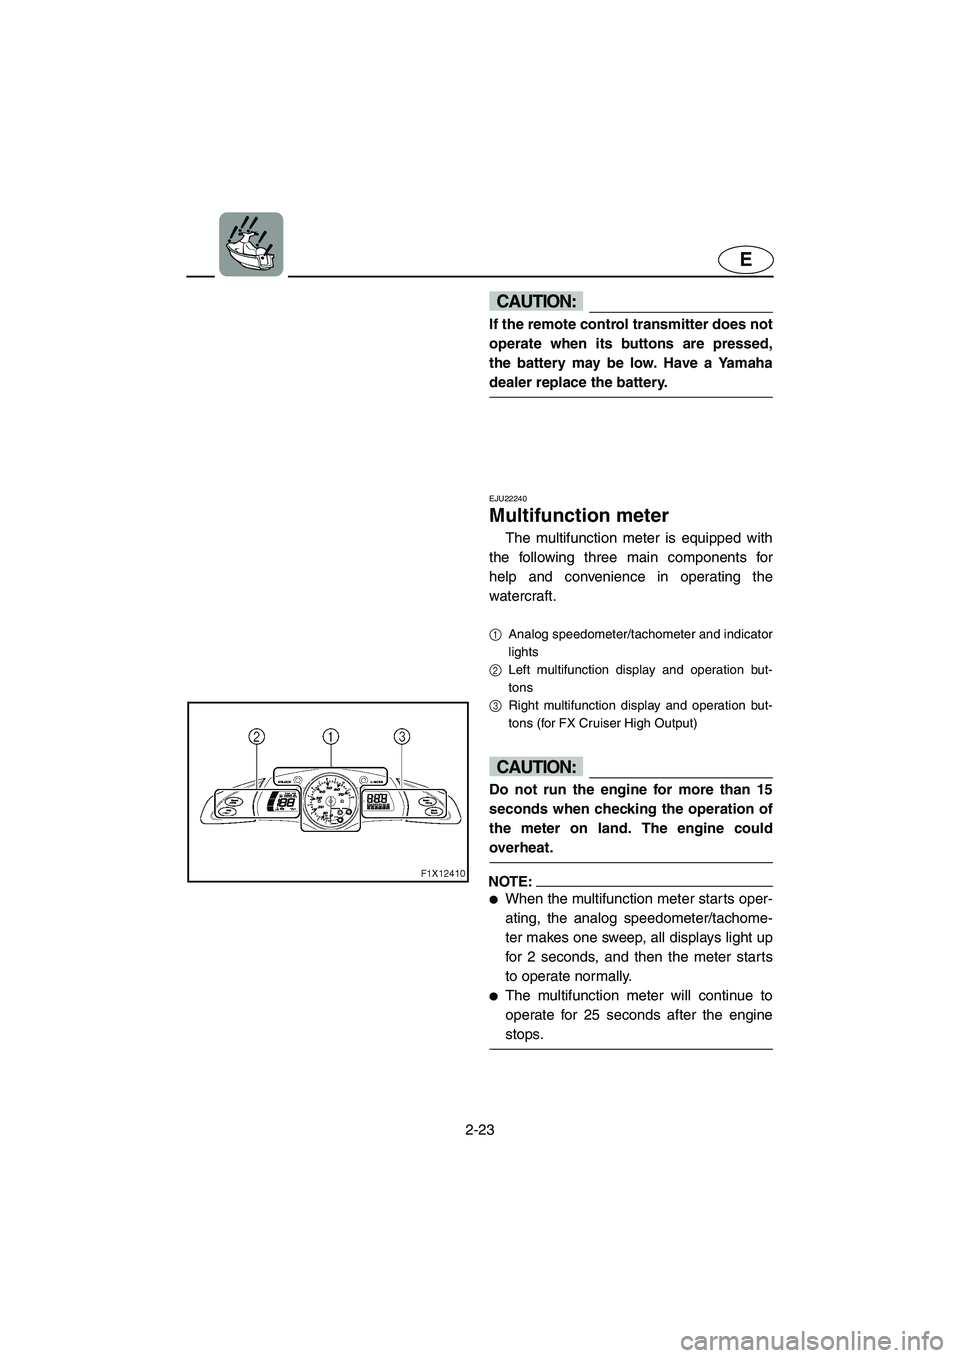 YAMAHA FX HO 2006 Workshop Manual 2-23
E
CAUTION:@ If the remote control transmitter does not
operate when its buttons are pressed,
the battery may be low. Have a Yamaha
dealer replace the battery. 
@ 
EJU22240 
Multifunction meter 
T